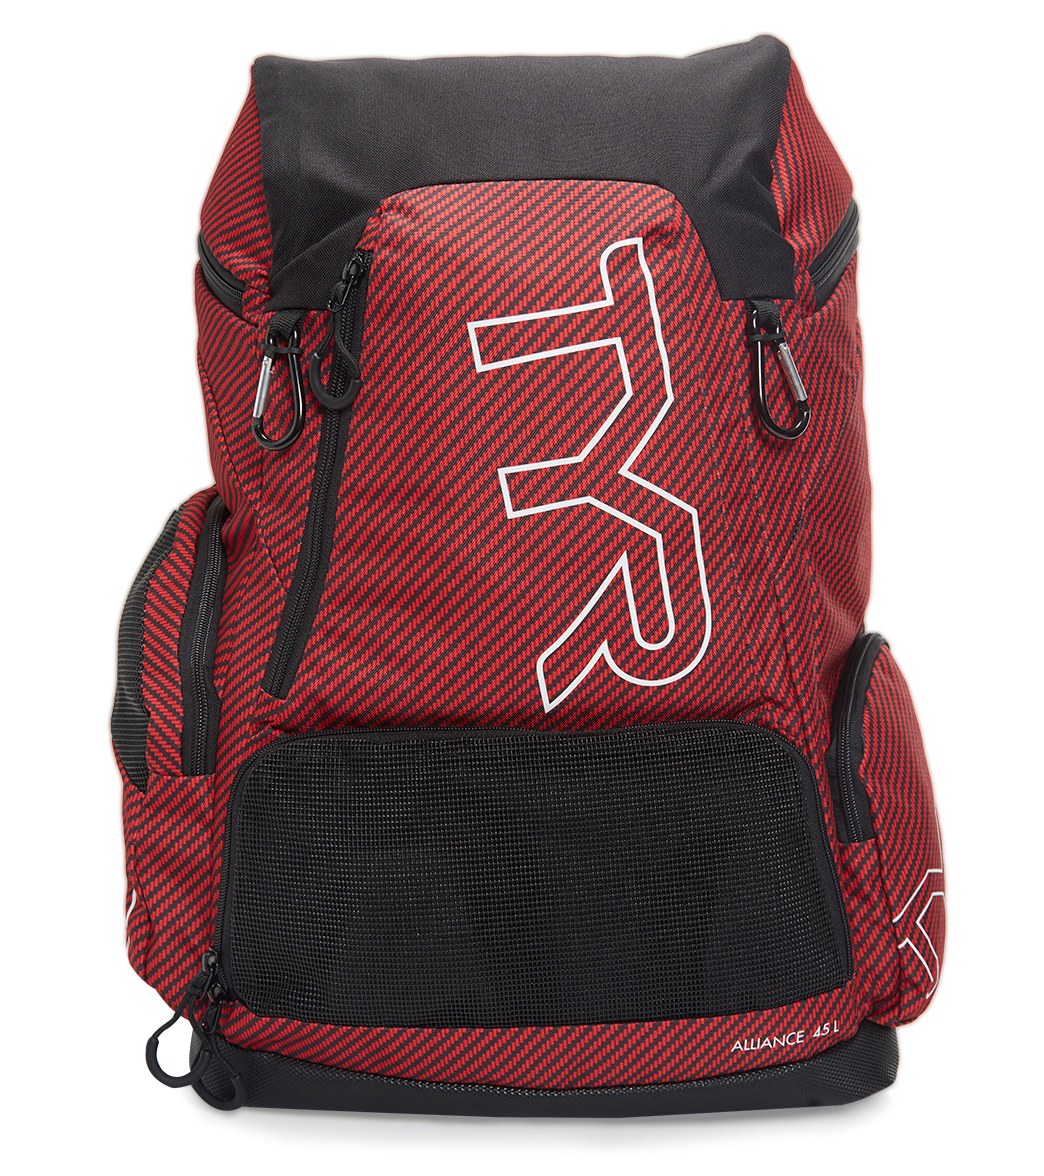 TYR Alliance 45L Team Carbon Print Backpack - Red - Swimoutlet.com